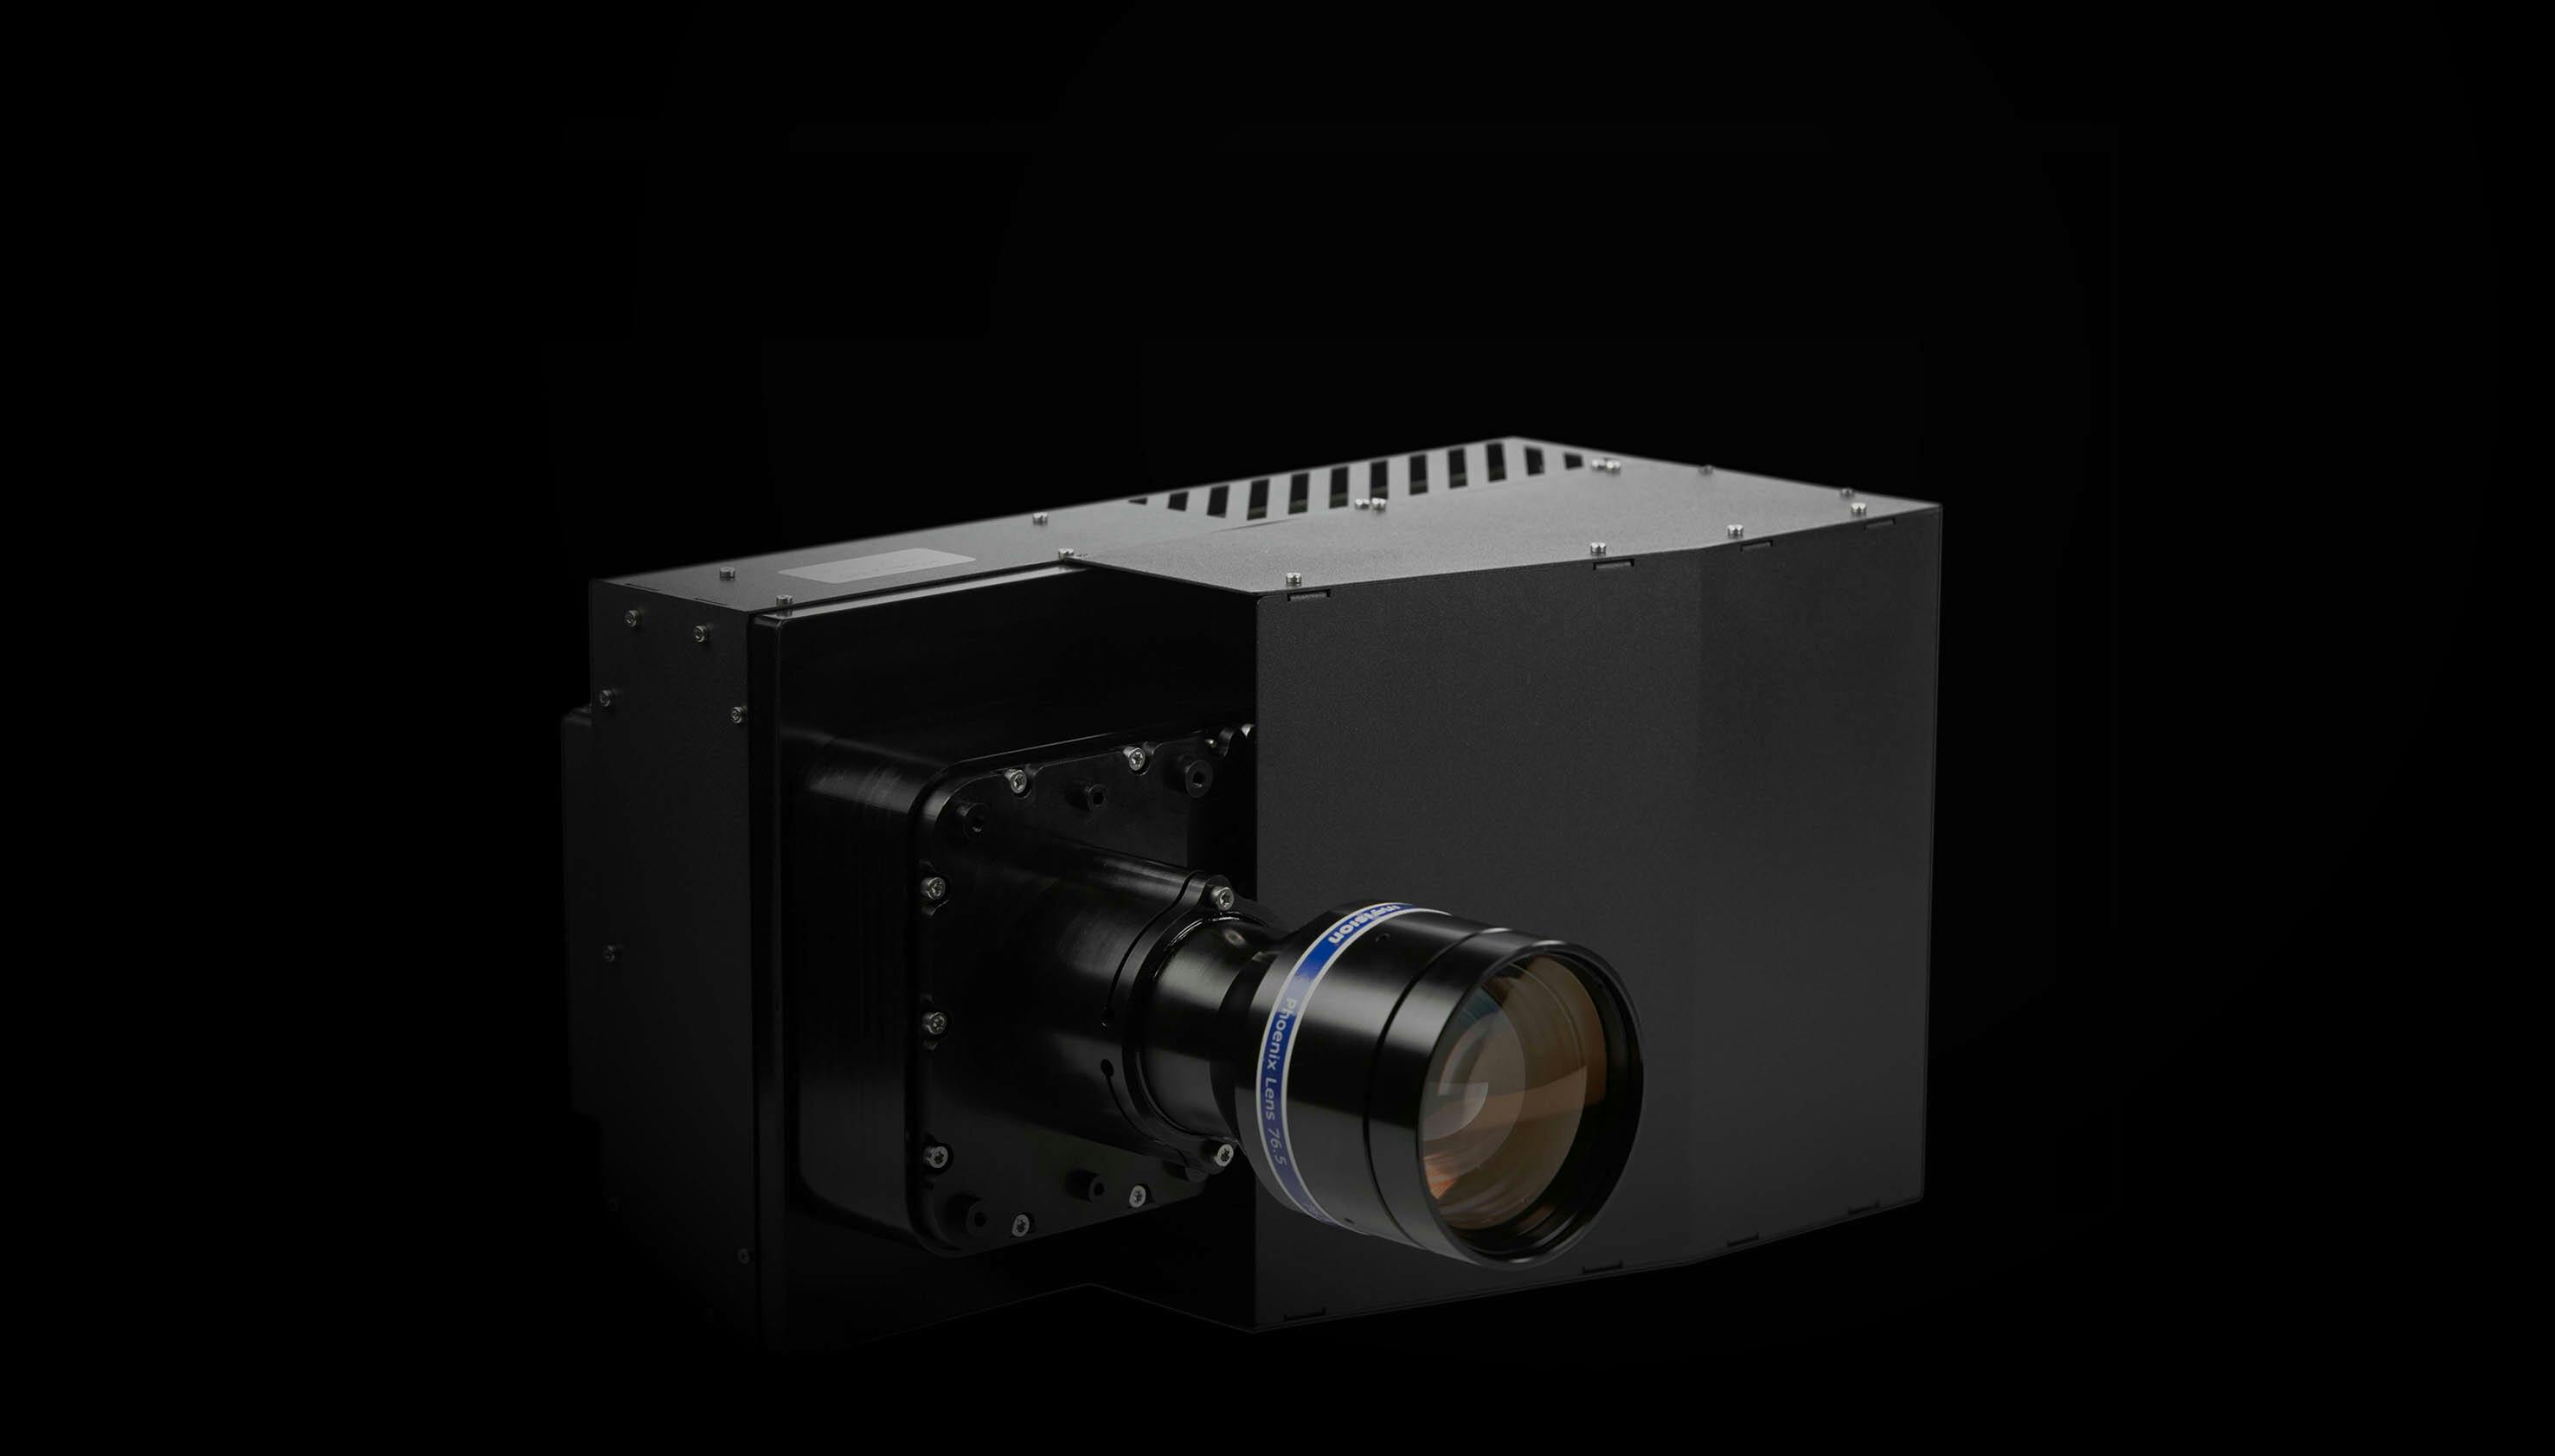 Phoenix is the first industrial 4K UV light engine. Its available as 405nm 4k UV projector and also for other wavelenght.